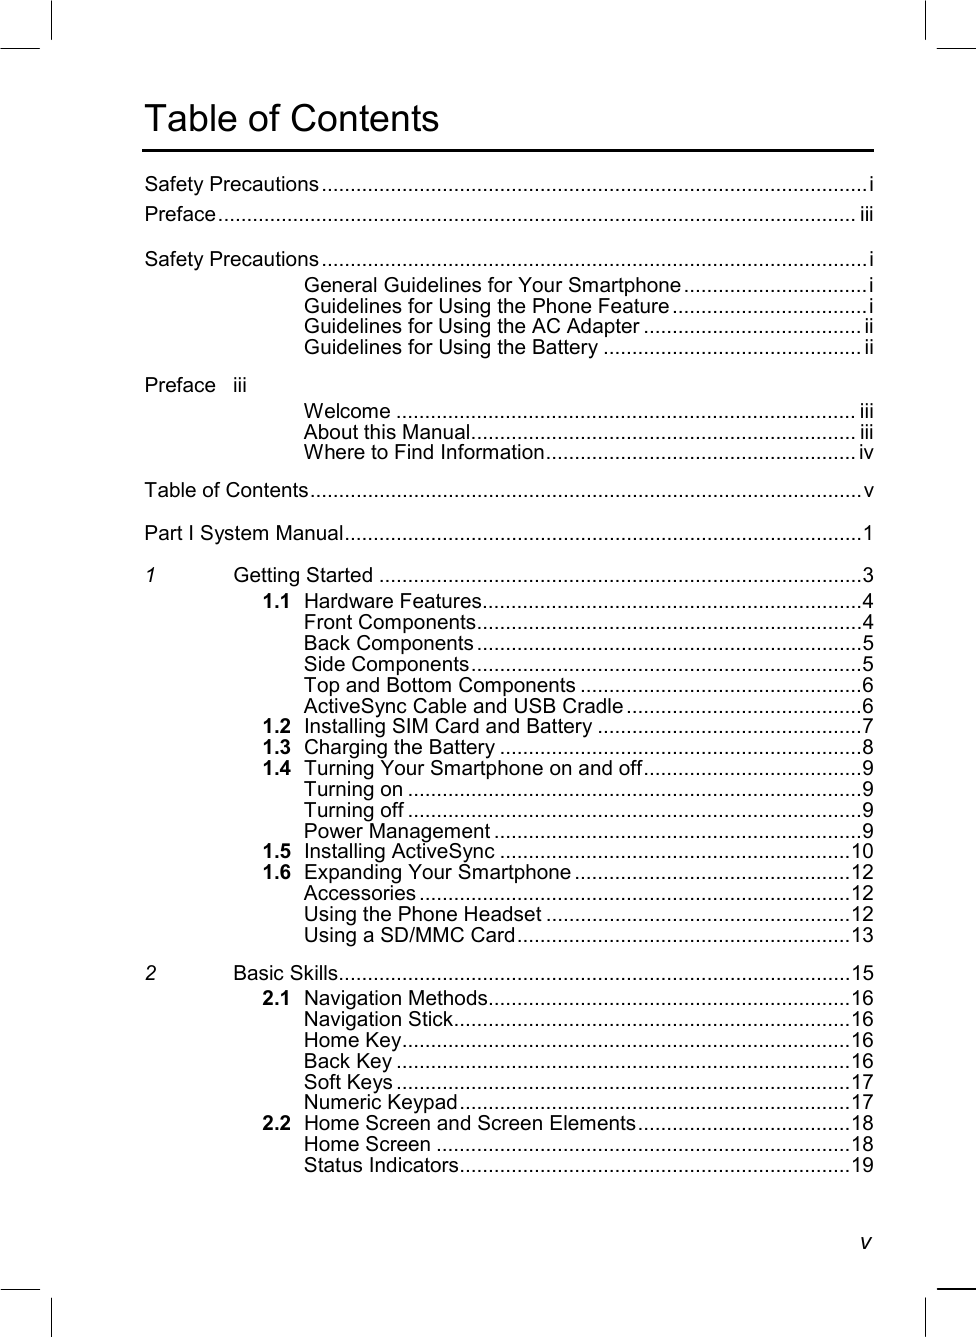   v Table of Contents Safety Precautions...............................................................................................i Preface............................................................................................................... iii Safety Precautions...............................................................................................i General Guidelines for Your Smartphone ................................i Guidelines for Using the Phone Feature ..................................i Guidelines for Using the AC Adapter ...................................... ii Guidelines for Using the Battery ............................................. ii Preface iii Welcome ................................................................................ iii About this Manual................................................................... iii Where to Find Information...................................................... iv Table of Contents................................................................................................v Part I System Manual..........................................................................................1 1 Getting Started ....................................................................................3 1.1 Hardware Features..................................................................4 Front Components...................................................................4 Back Components ...................................................................5 Side Components....................................................................5 Top and Bottom Components .................................................6 ActiveSync Cable and USB Cradle .........................................6 1.2  Installing SIM Card and Battery ..............................................7 1.3 Charging the Battery ...............................................................8 1.4 Turning Your Smartphone on and off......................................9 Turning on ...............................................................................9 Turning off ...............................................................................9 Power Management ................................................................9 1.5 Installing ActiveSync .............................................................10 1.6 Expanding Your Smartphone ................................................12 Accessories ...........................................................................12 Using the Phone Headset .....................................................12 Using a SD/MMC Card..........................................................13 2 Basic Skills.........................................................................................15 2.1 Navigation Methods...............................................................16 Navigation Stick.....................................................................16 Home Key..............................................................................16 Back Key ...............................................................................16 Soft Keys ...............................................................................17 Numeric Keypad....................................................................17 2.2  Home Screen and Screen Elements.....................................18 Home Screen ........................................................................18 Status Indicators....................................................................19 